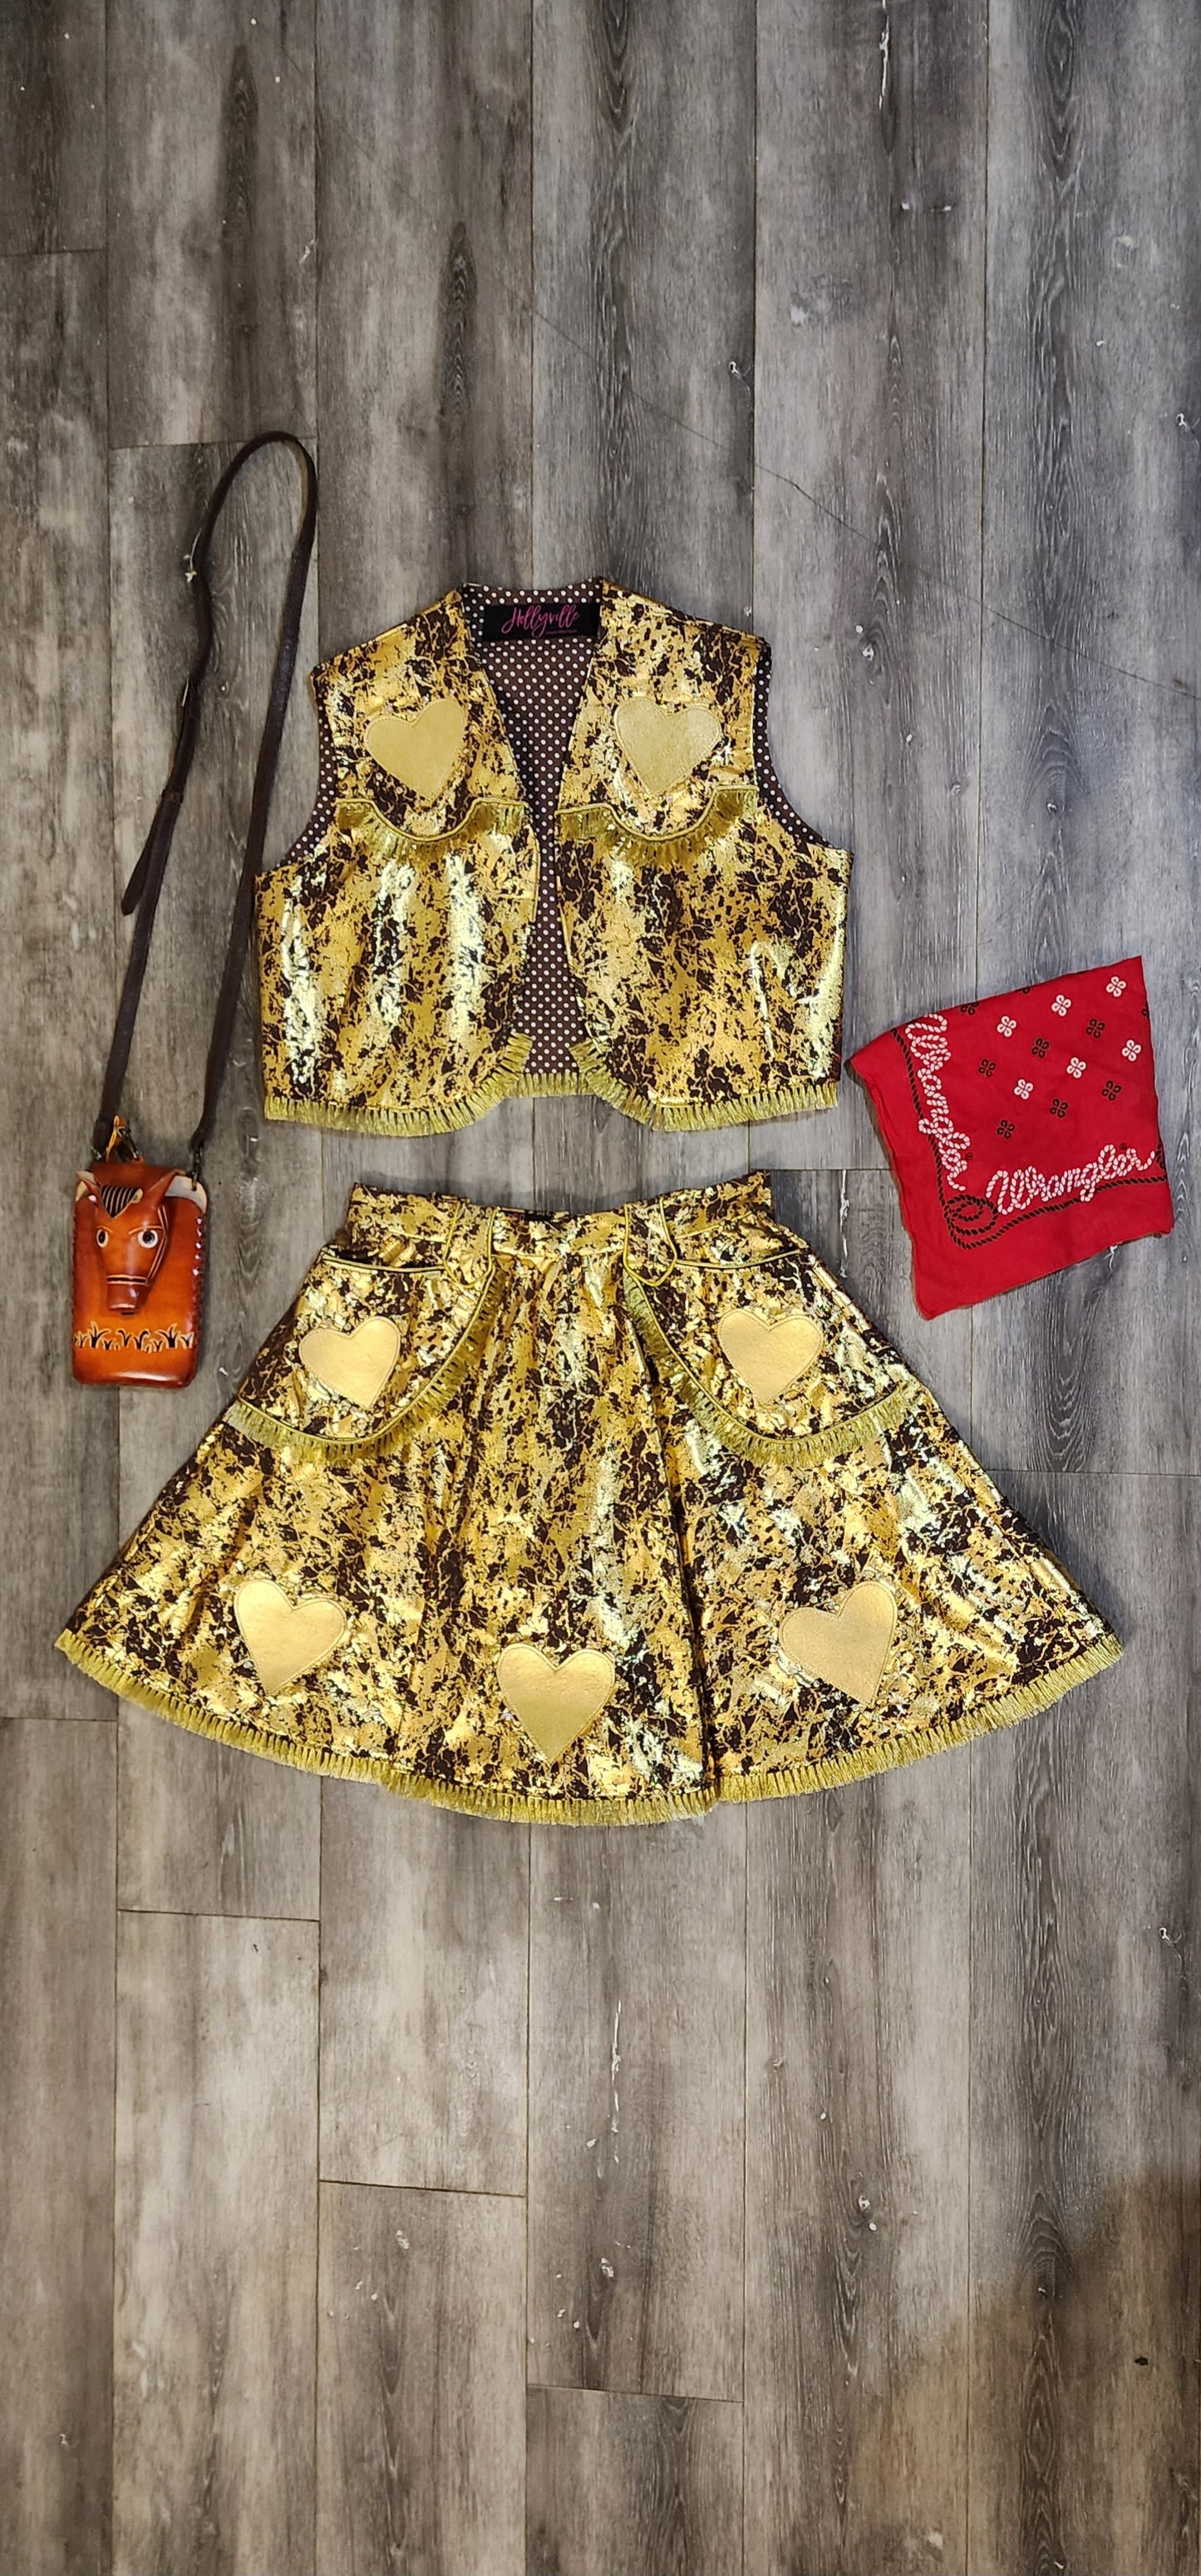 Rhinestone Cowgirl Western Vest and Skirt Set by Hollyville